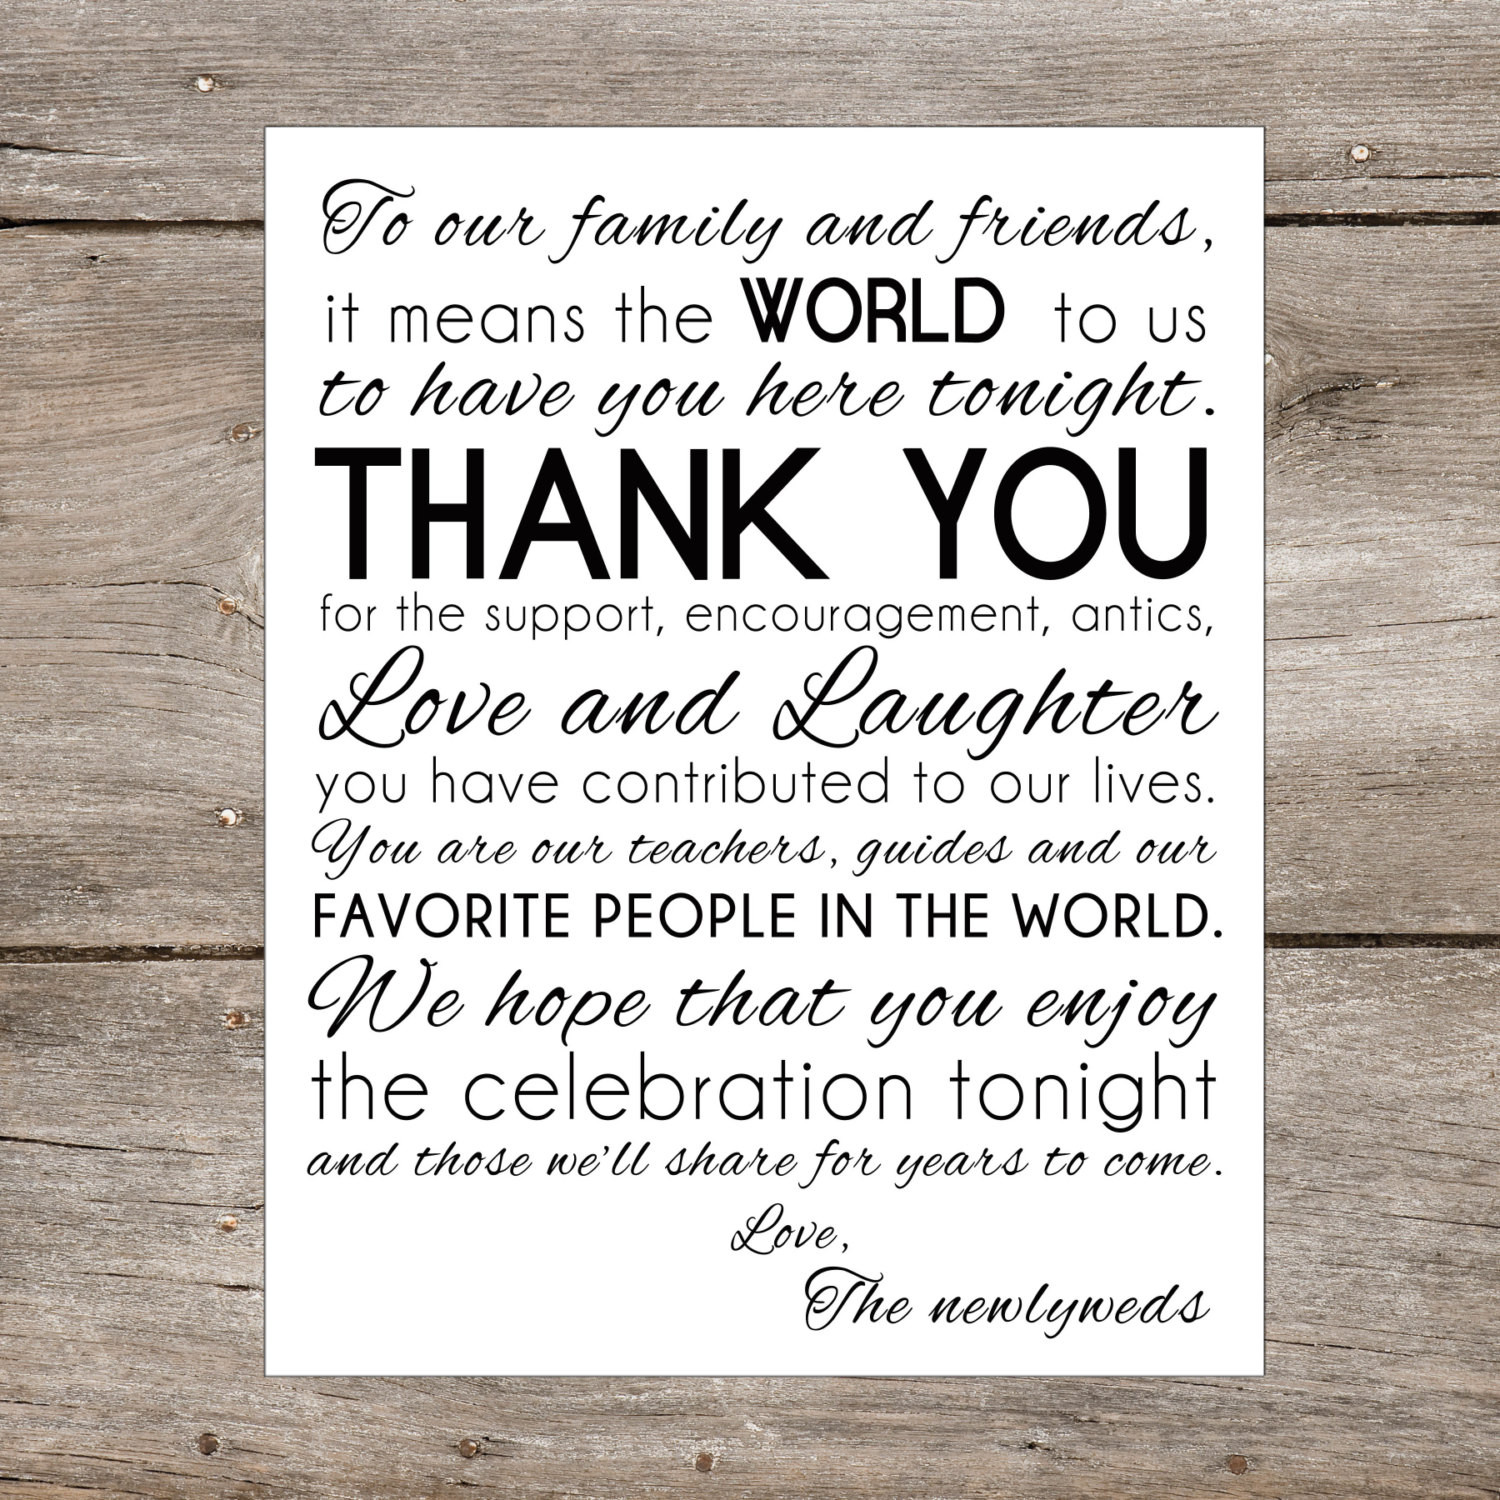 Thankful For Friends And Family Quotes
 Thank You Quotes For Friends And Family QuotesGram